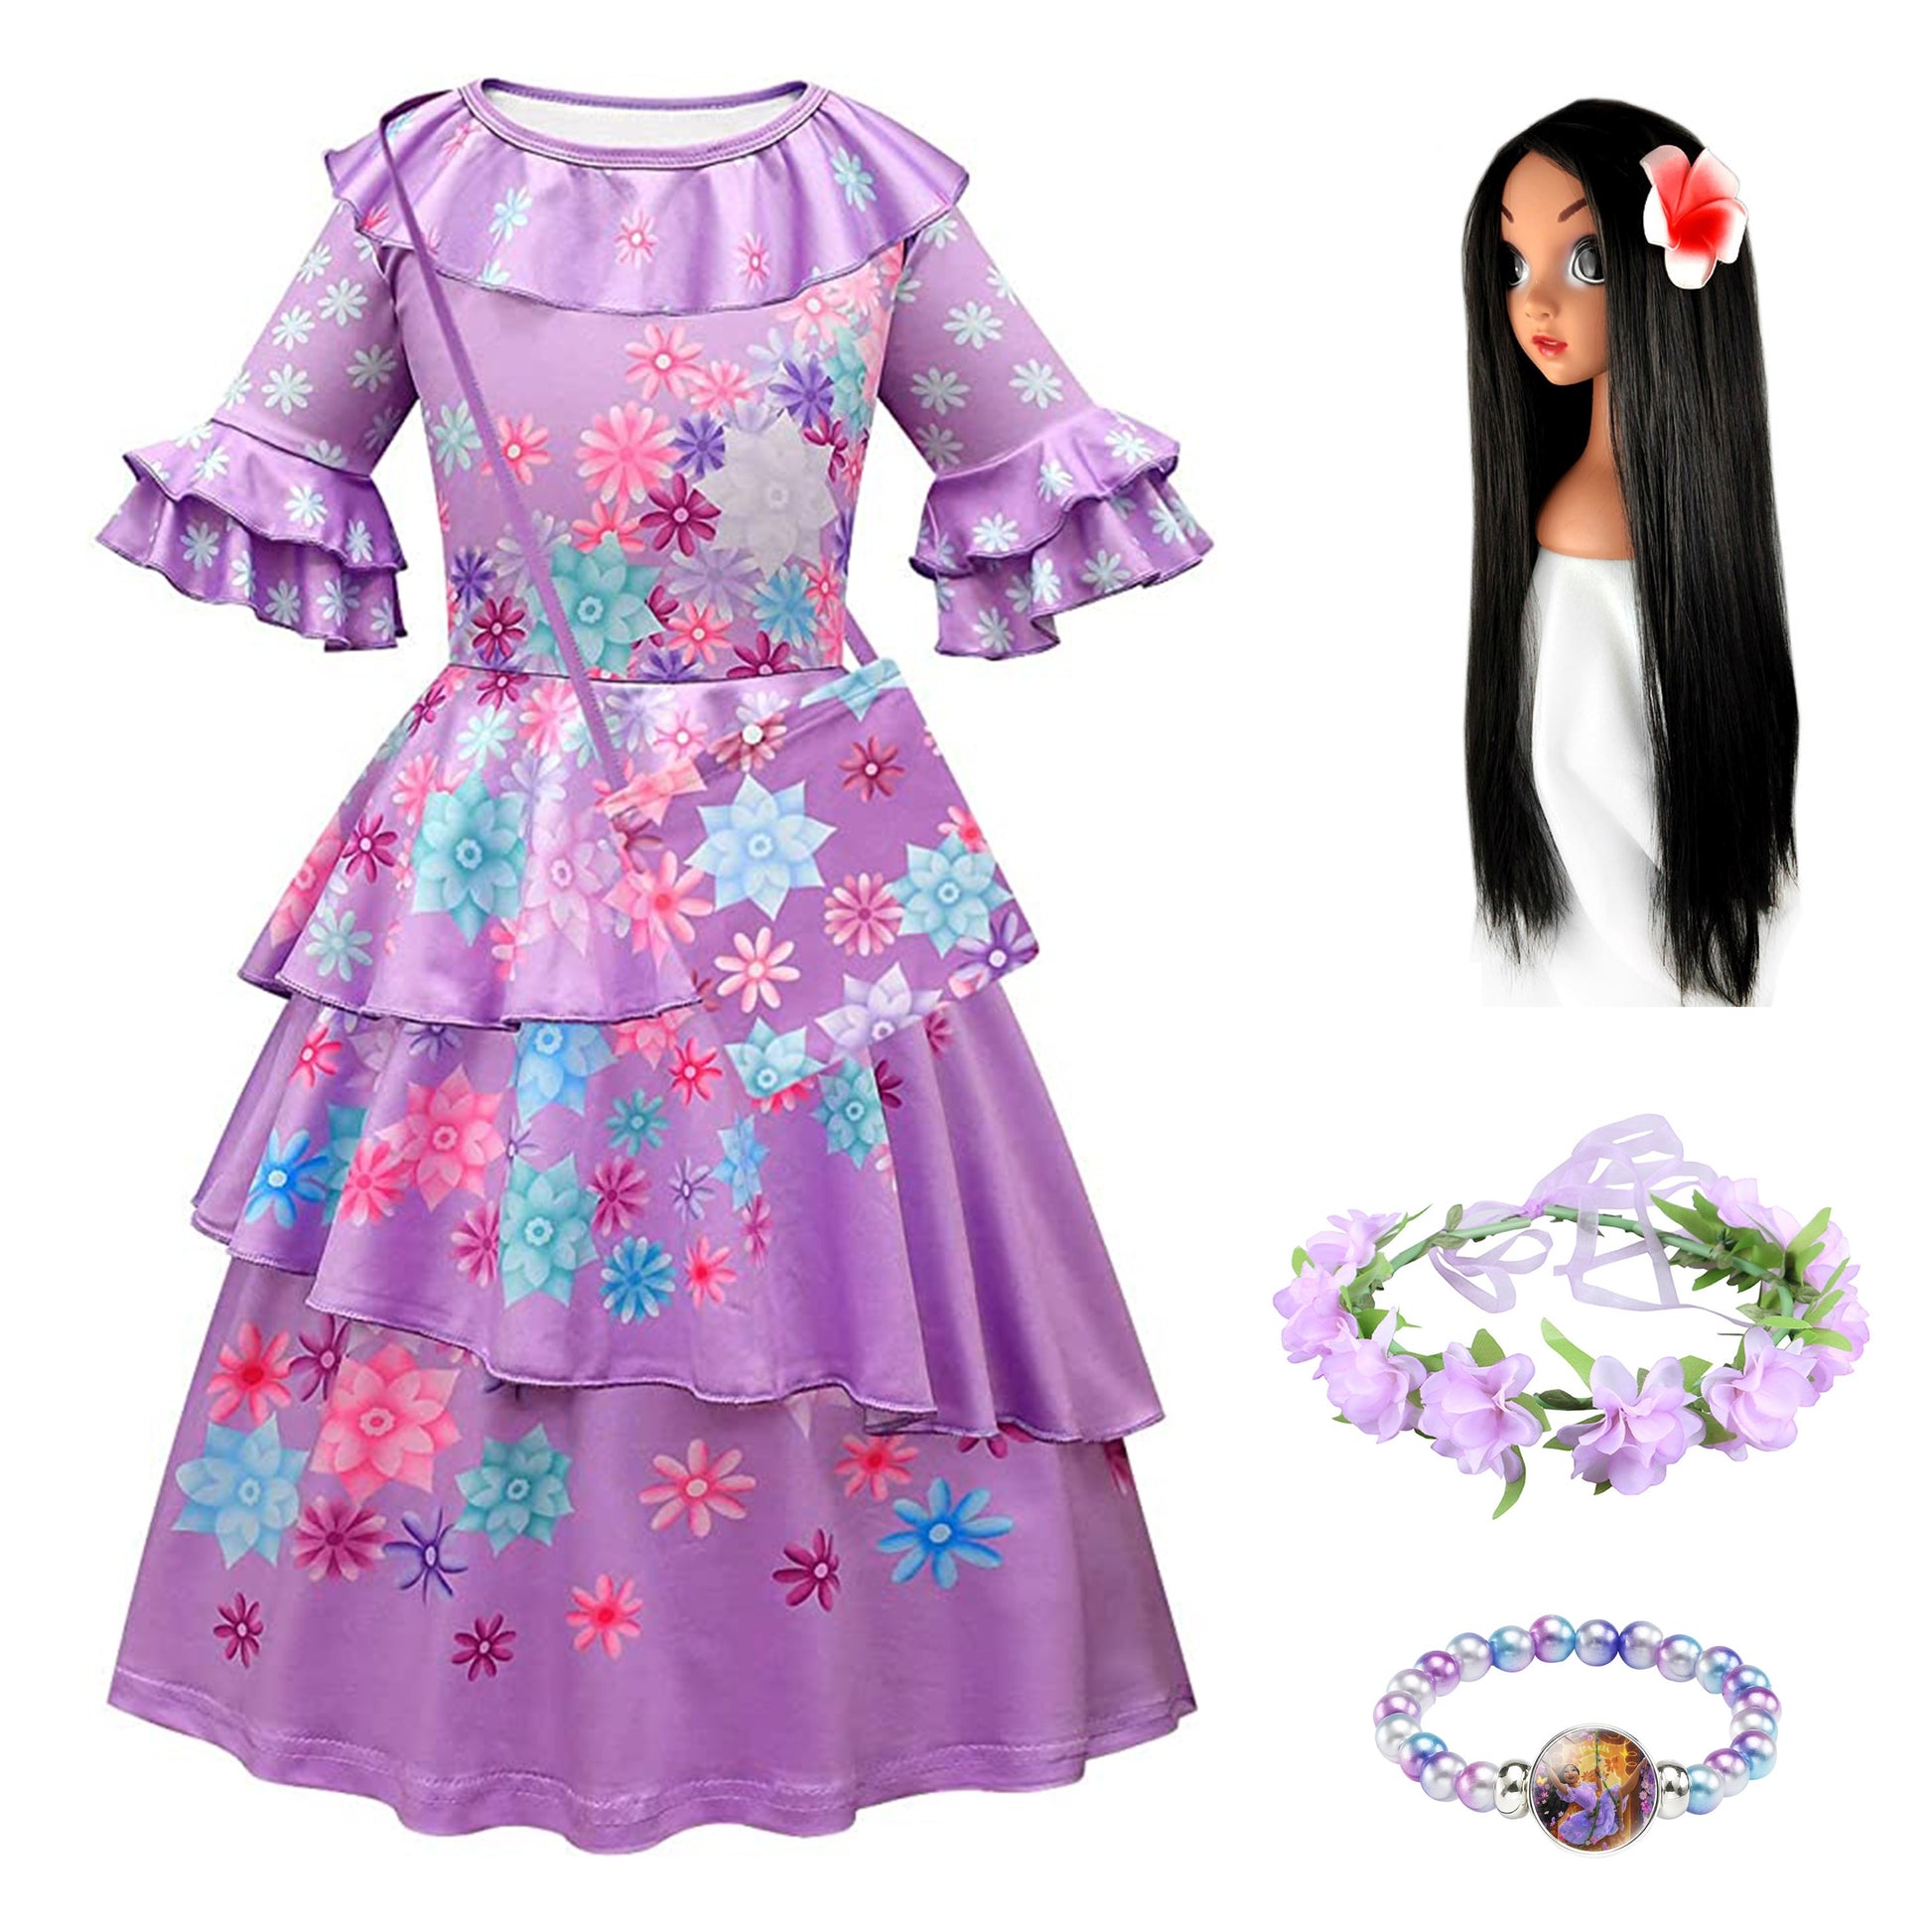 Encanto Isabella Madrigal Costume with Accessories